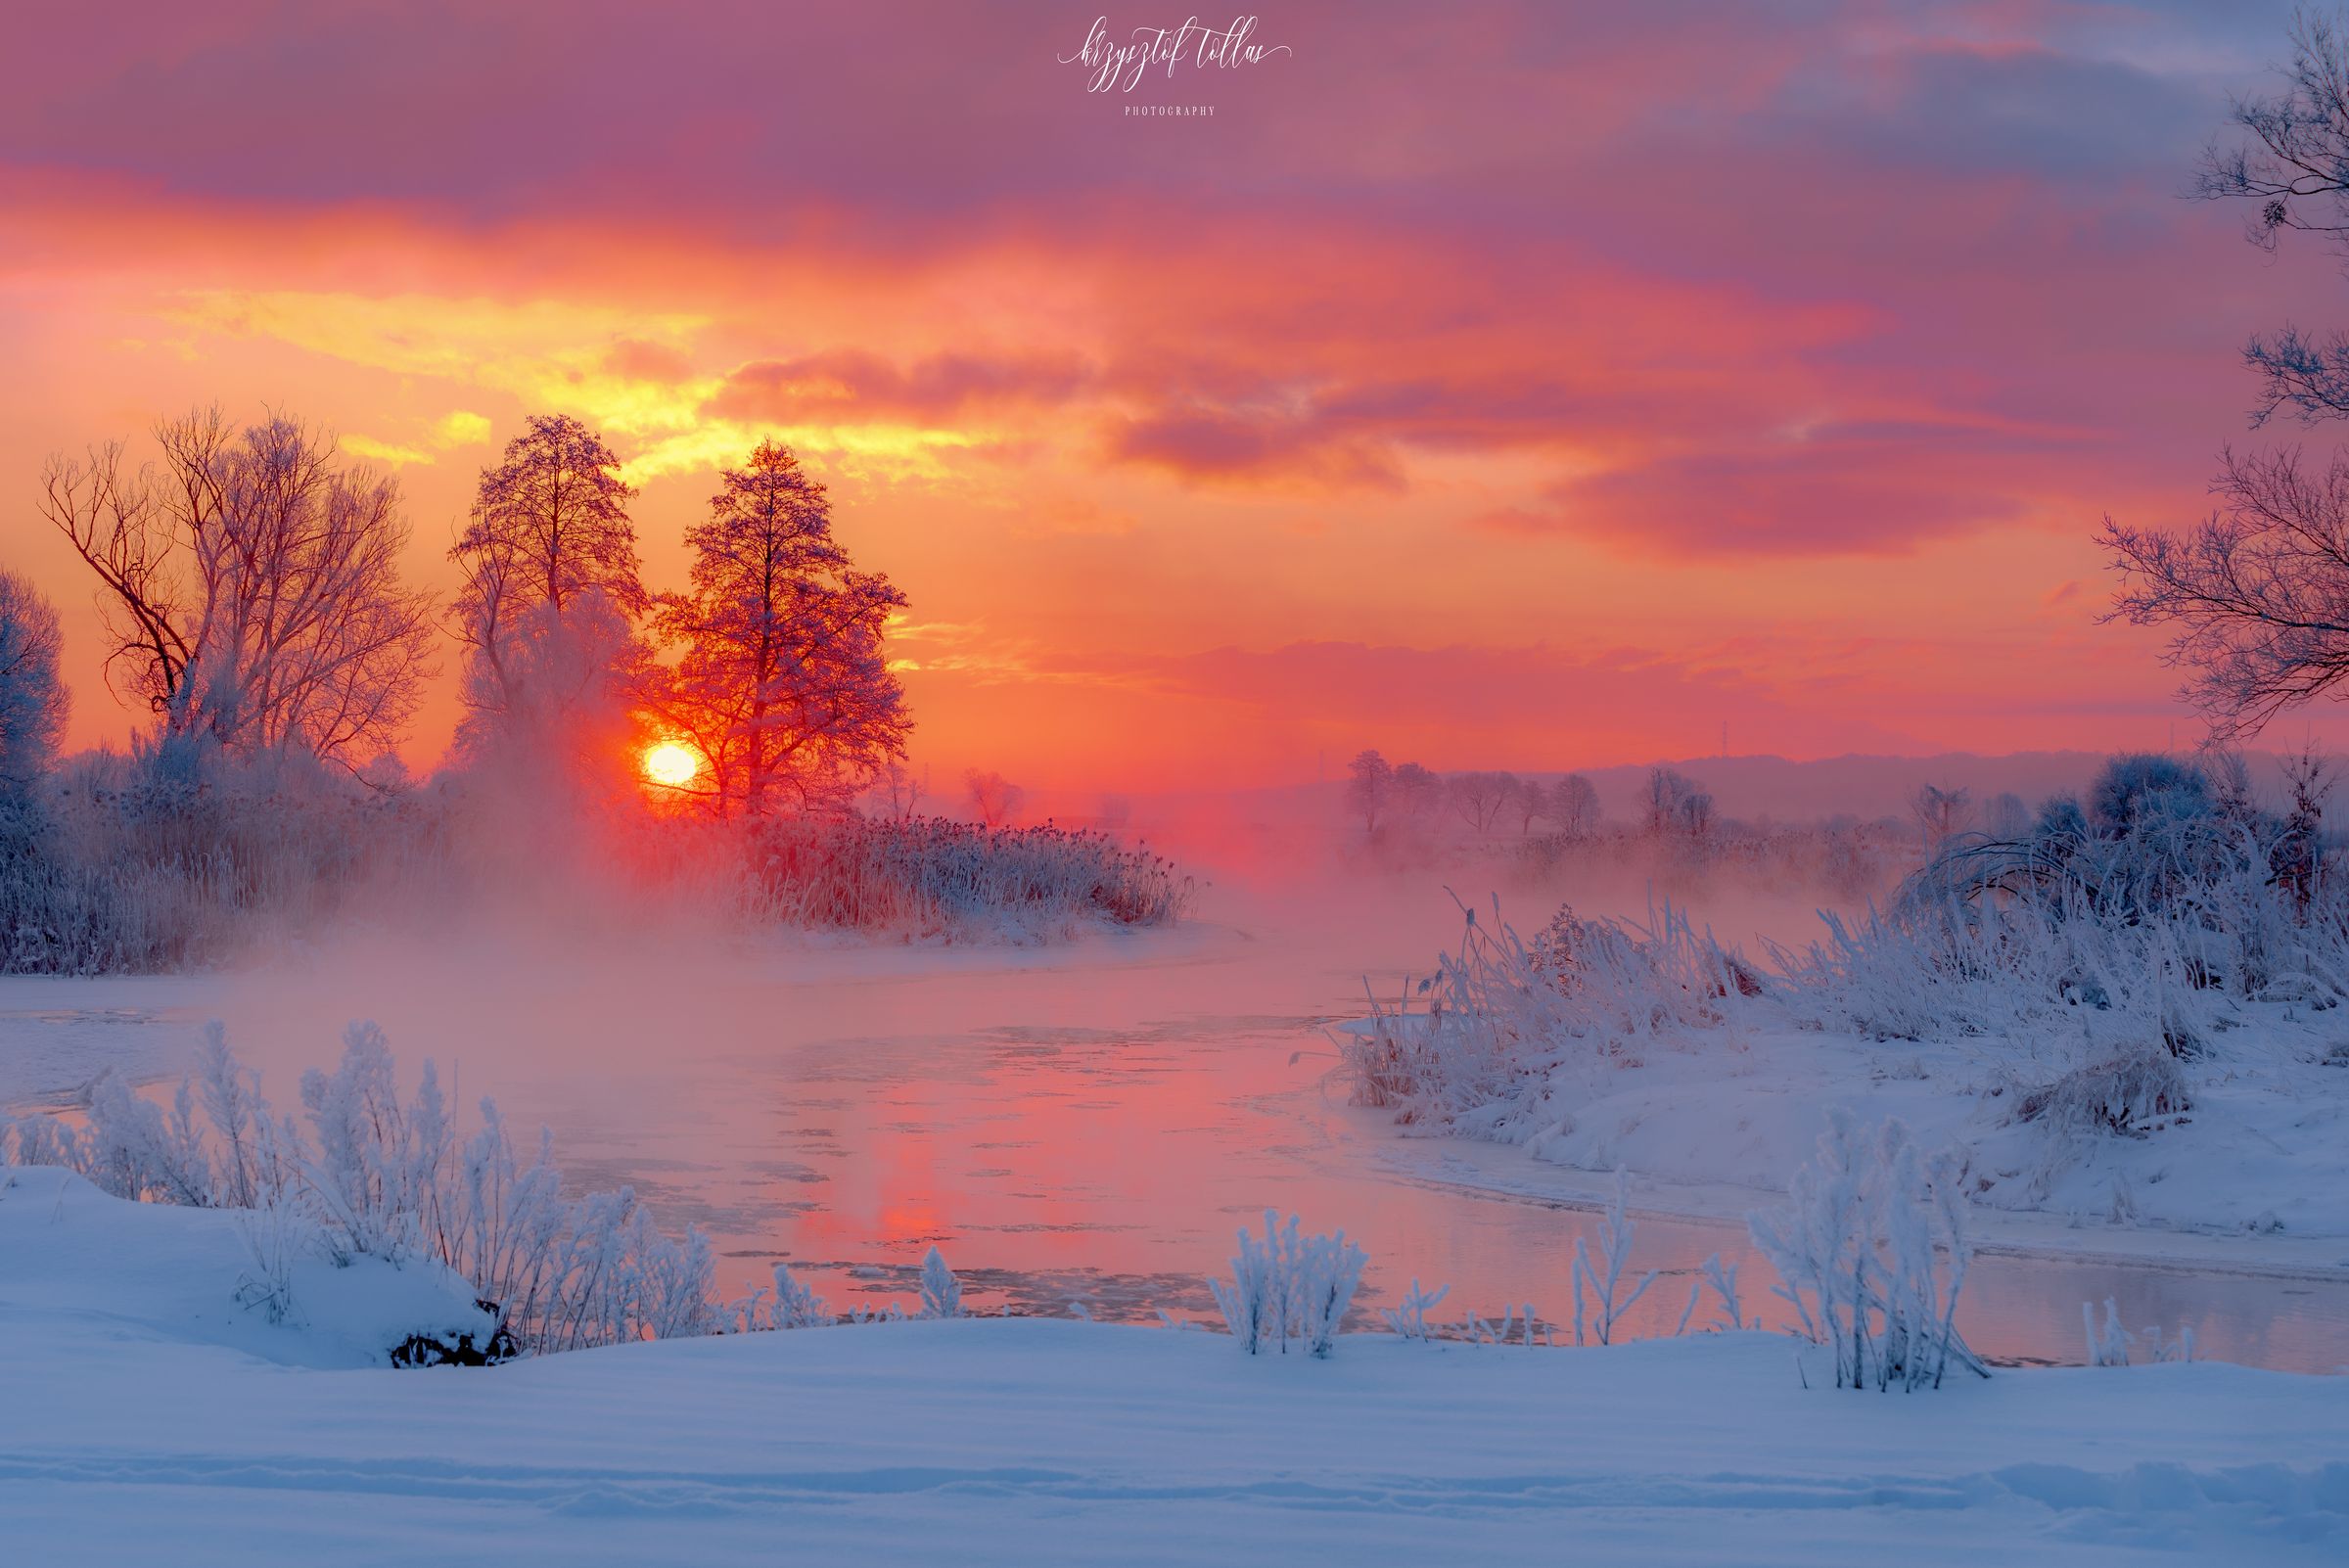 winter, frost, dawn, landscape, nature, river, Gwda, sky, clouds, fog, light, sun, trees, dreaming, water, reflection in the water, nikon, Krzysztof Tollas